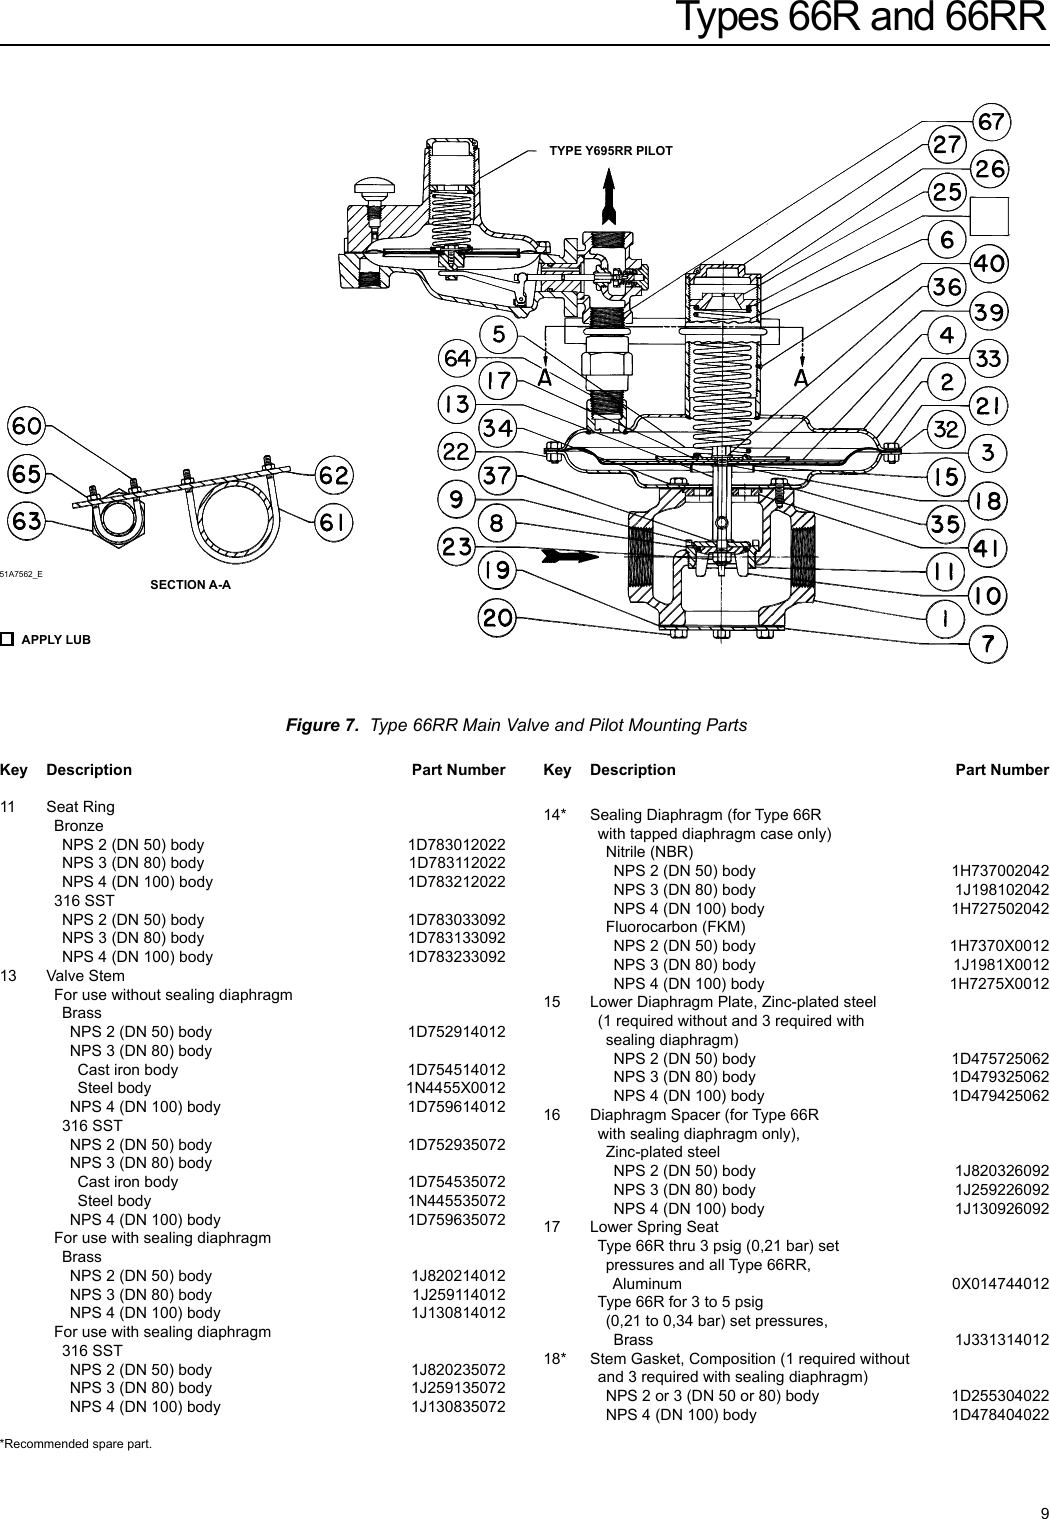 Page 9 of 12 - Emerson Emerson-66R-Series-Vapor-Recovery-Valves-Instruction-Manual-  Emerson-66r-series-vapor-recovery-valves-instruction-manual